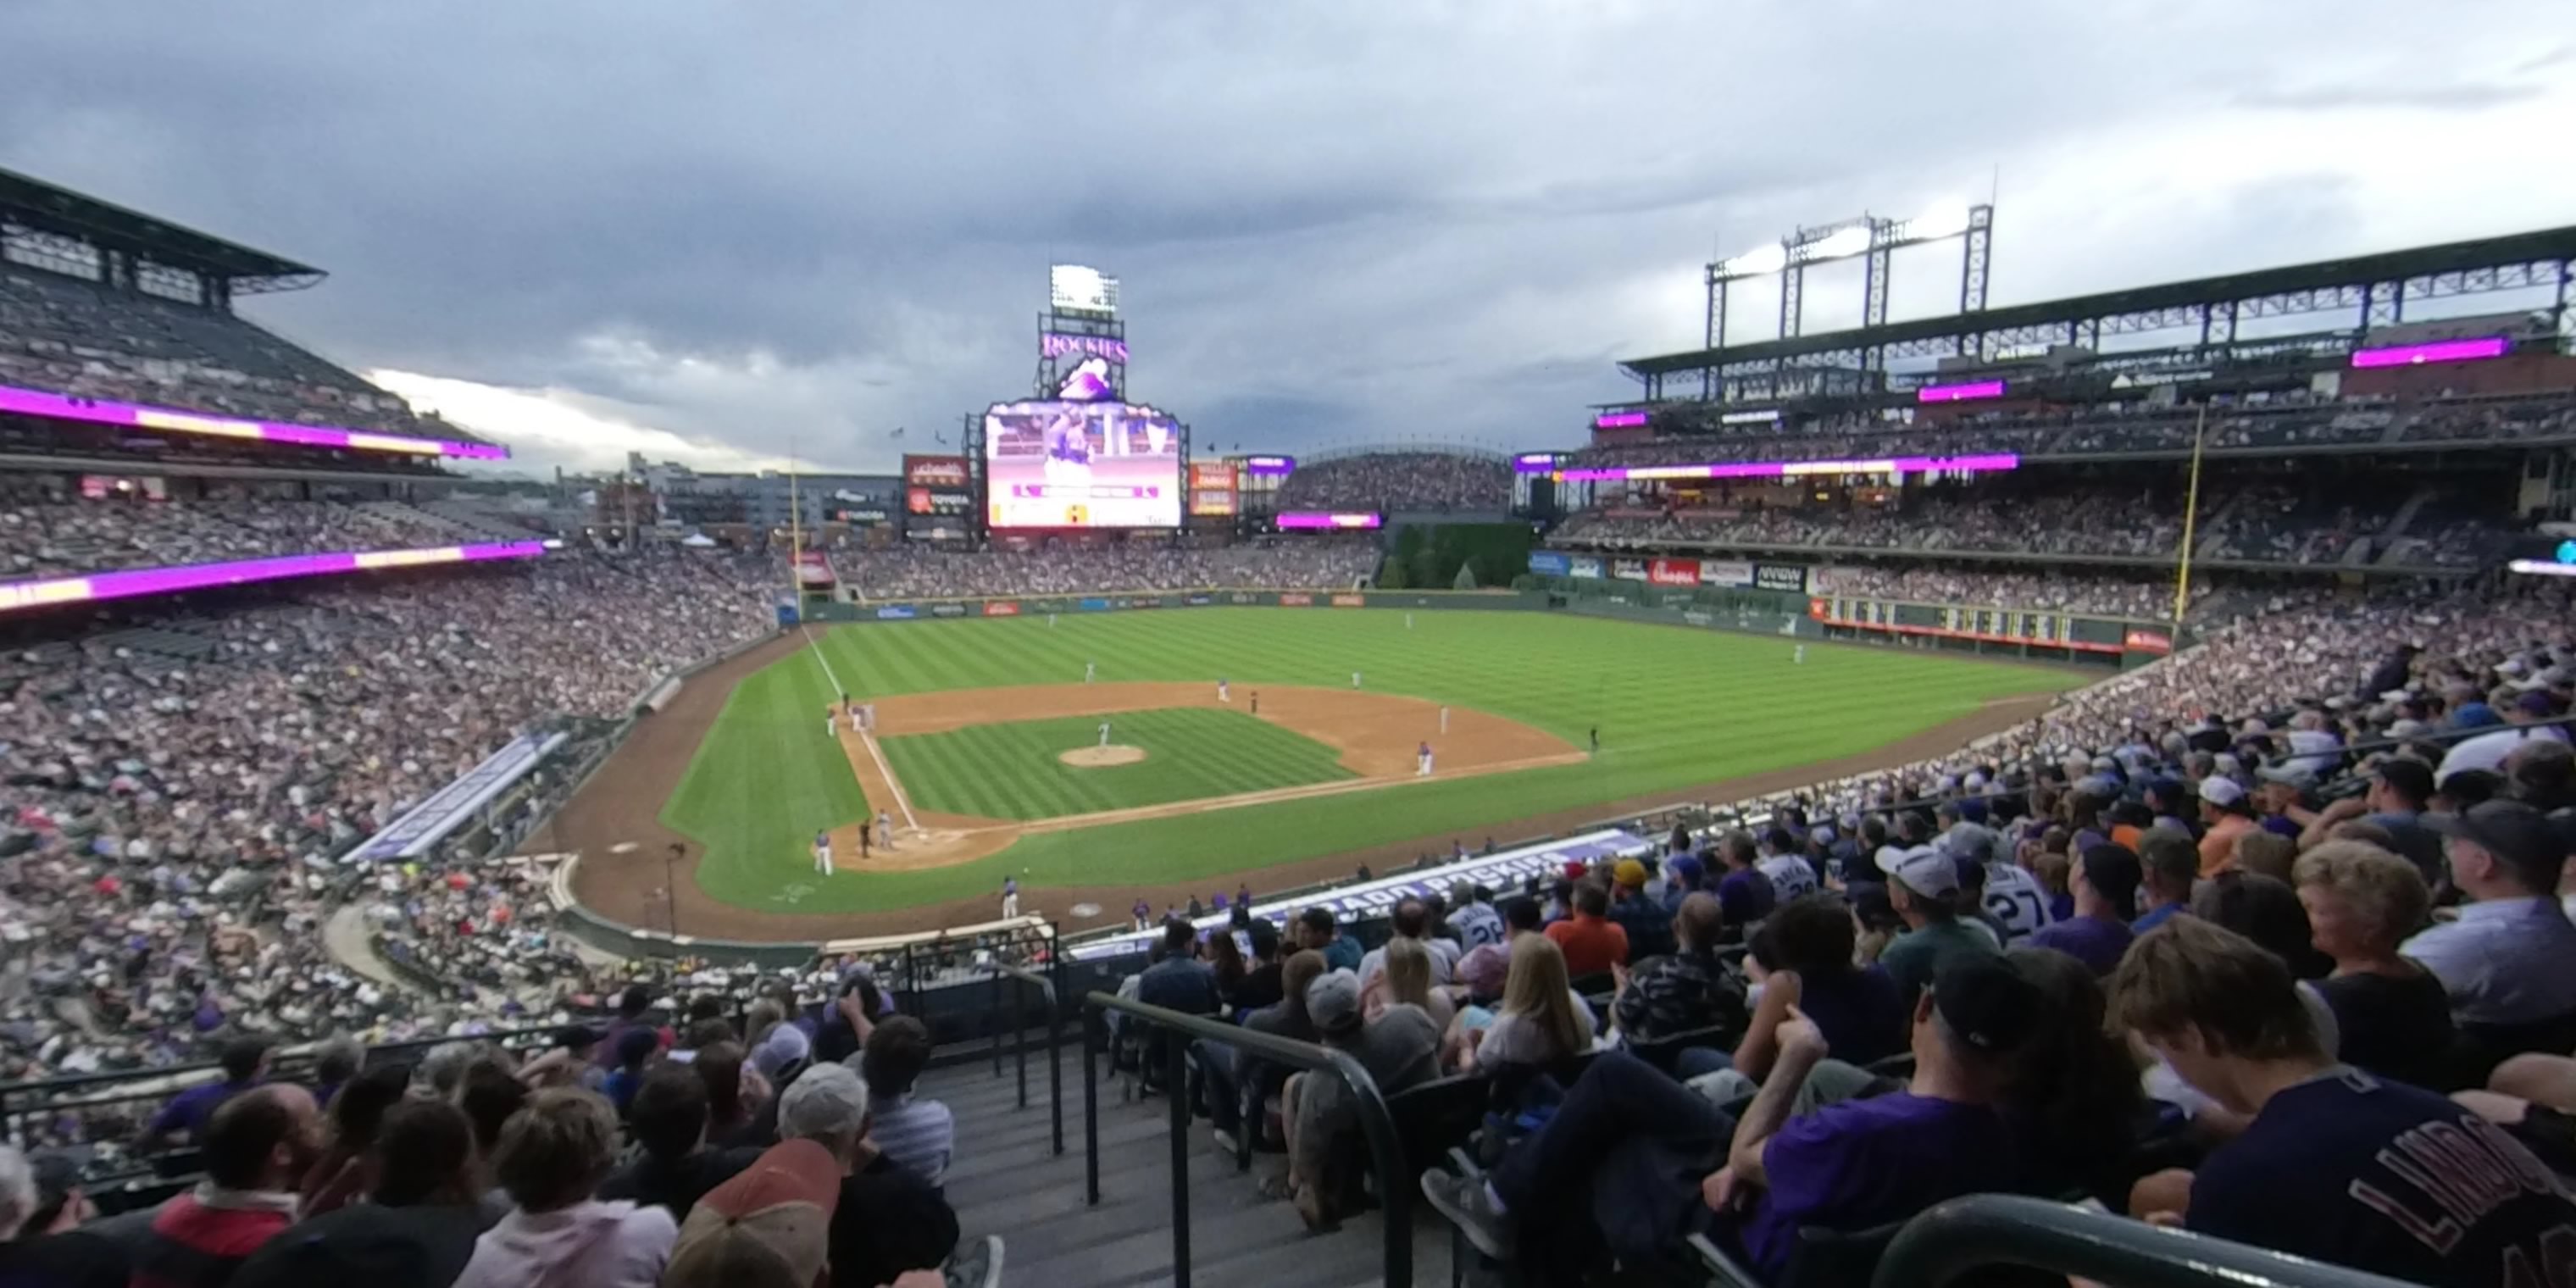 section 227 panoramic seat view  - coors field